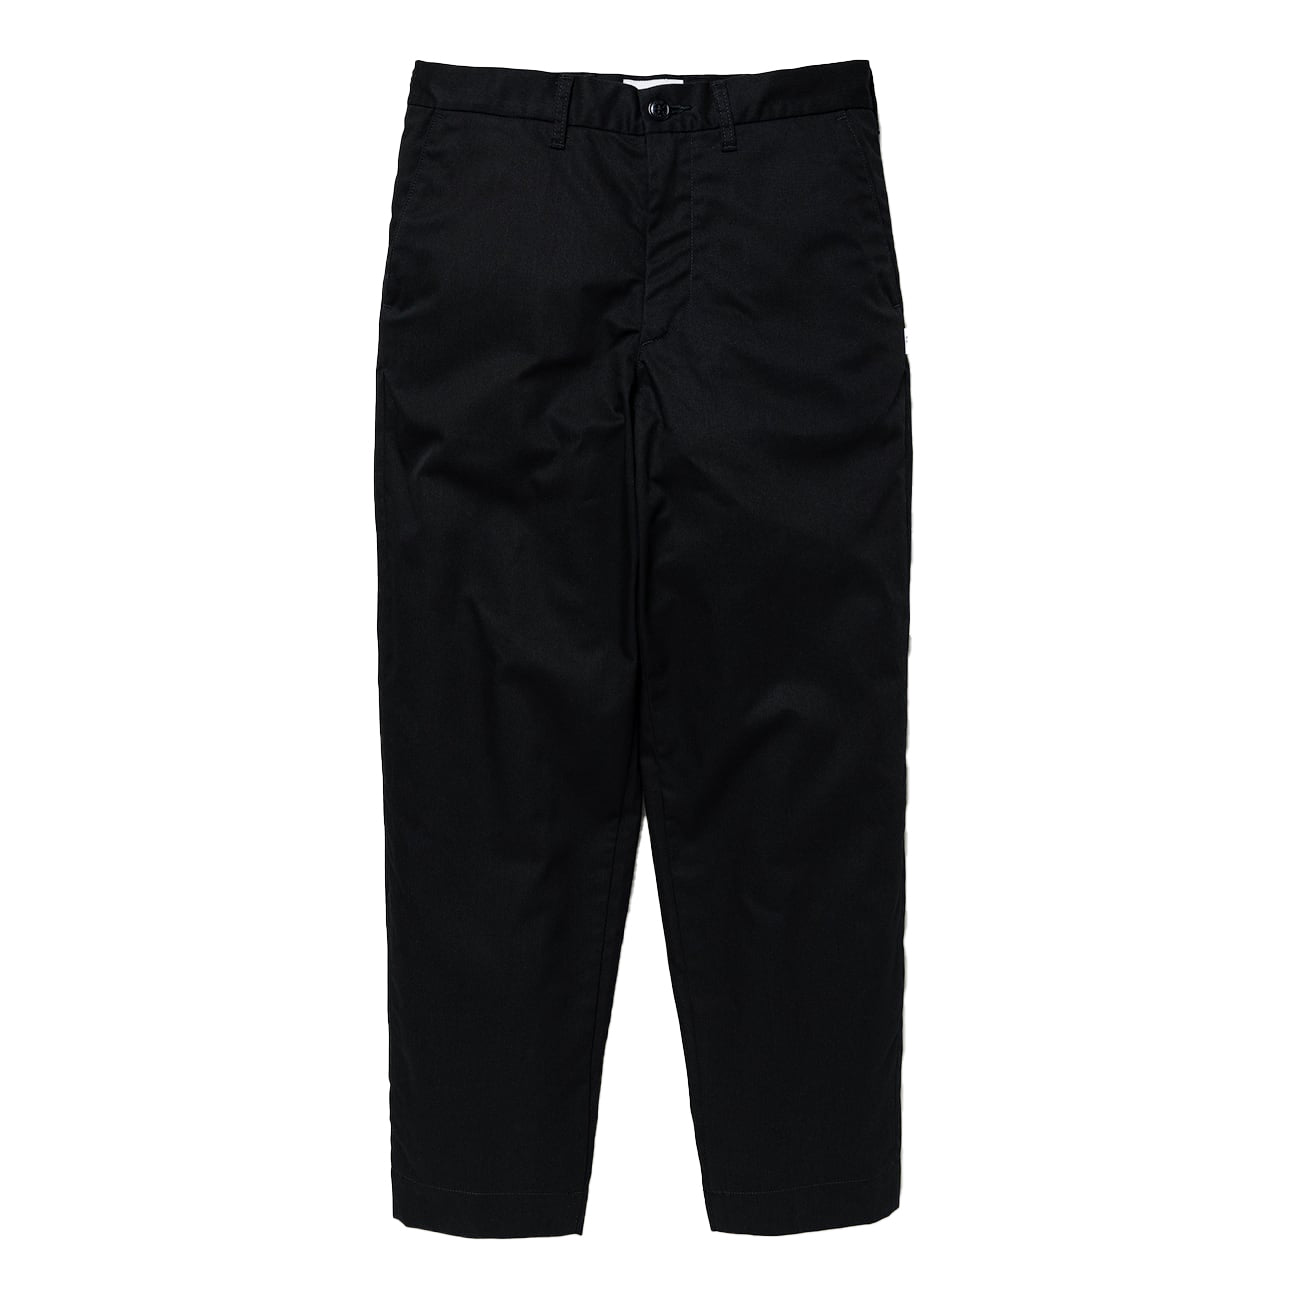 WRKT2001 / Trousers / CTPL. Twill - INVINCIBLE